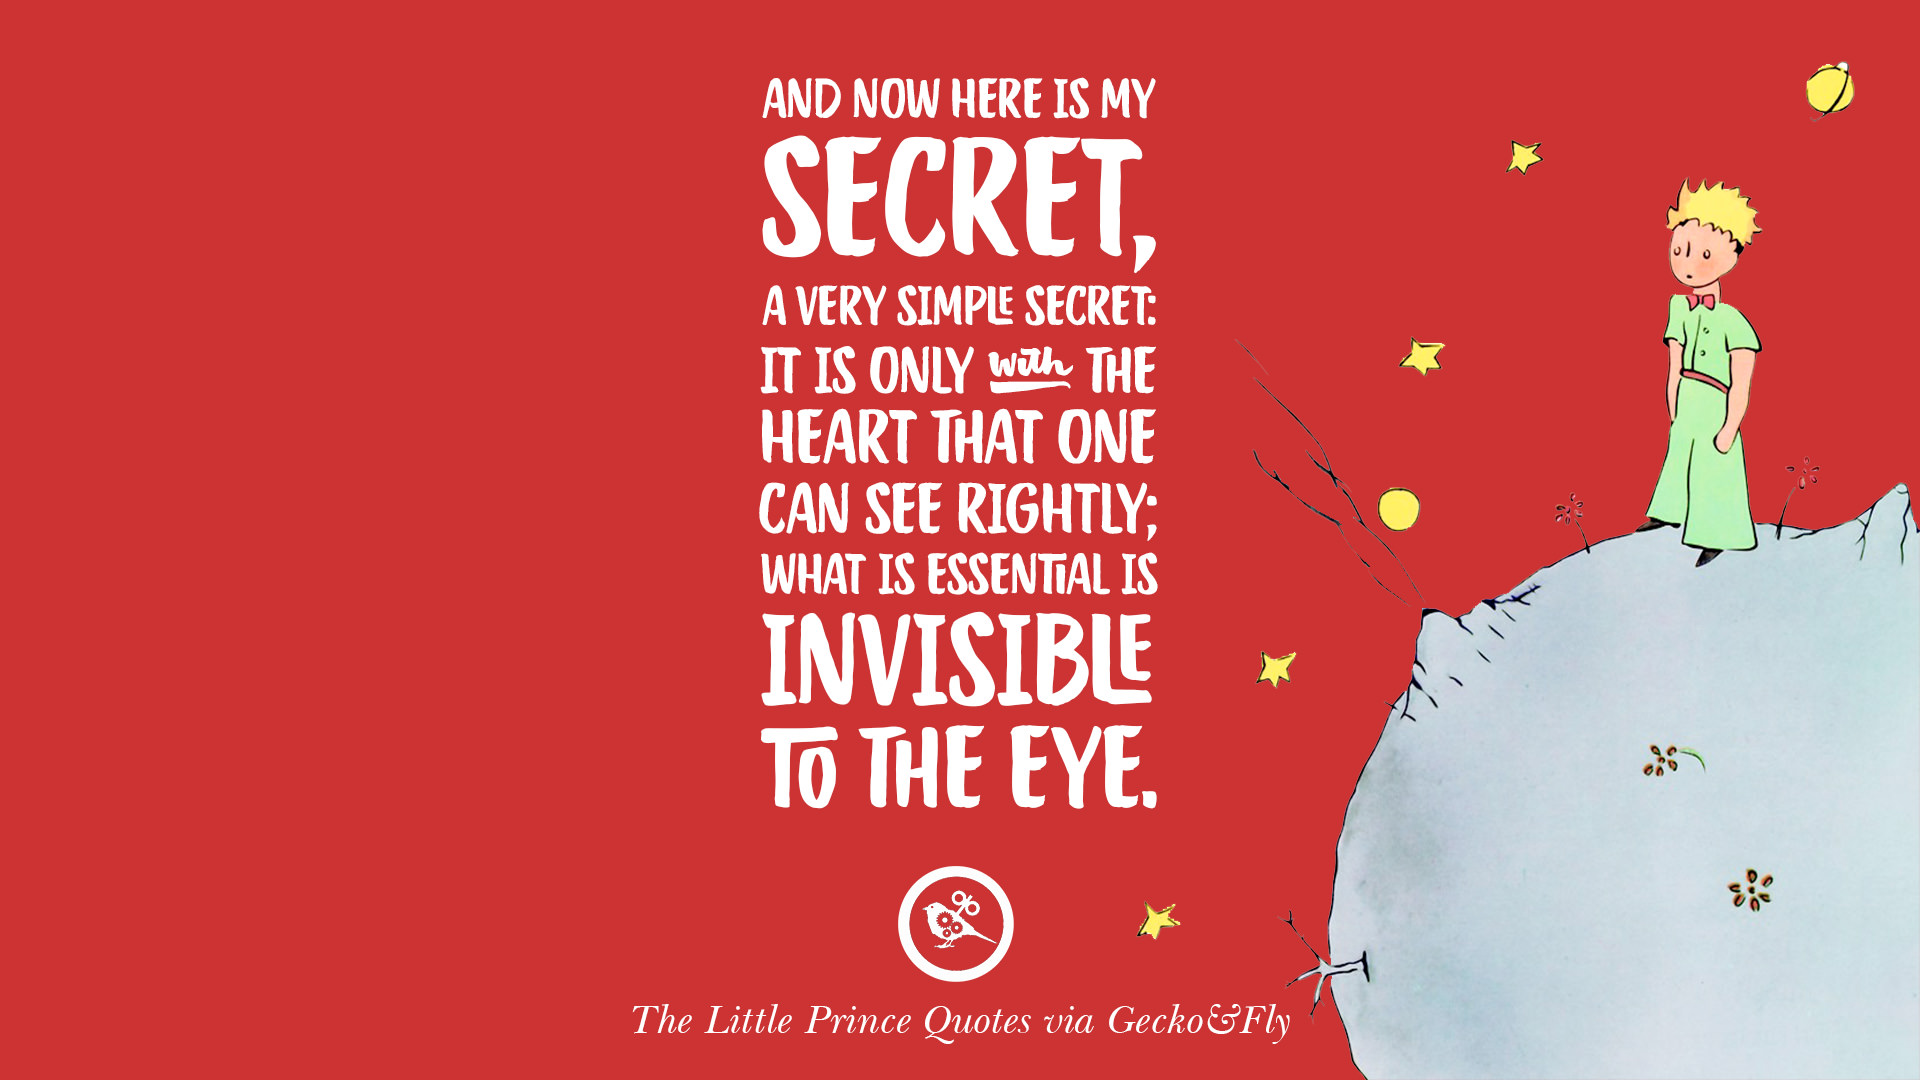 12 Quotes  By The Little  Prince On Life Lesson True Love  